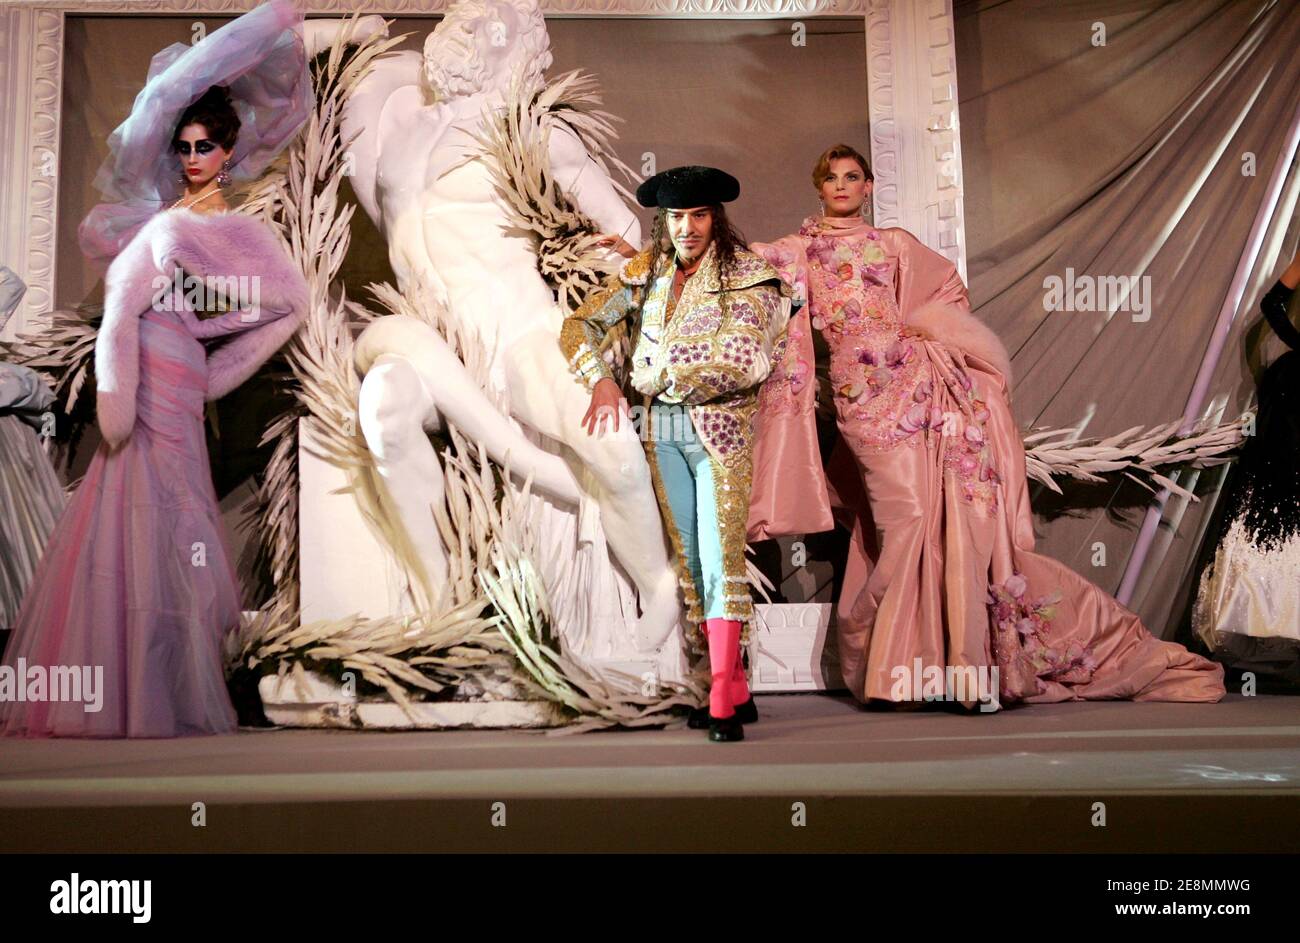 John Galliano on his show-ending costumes